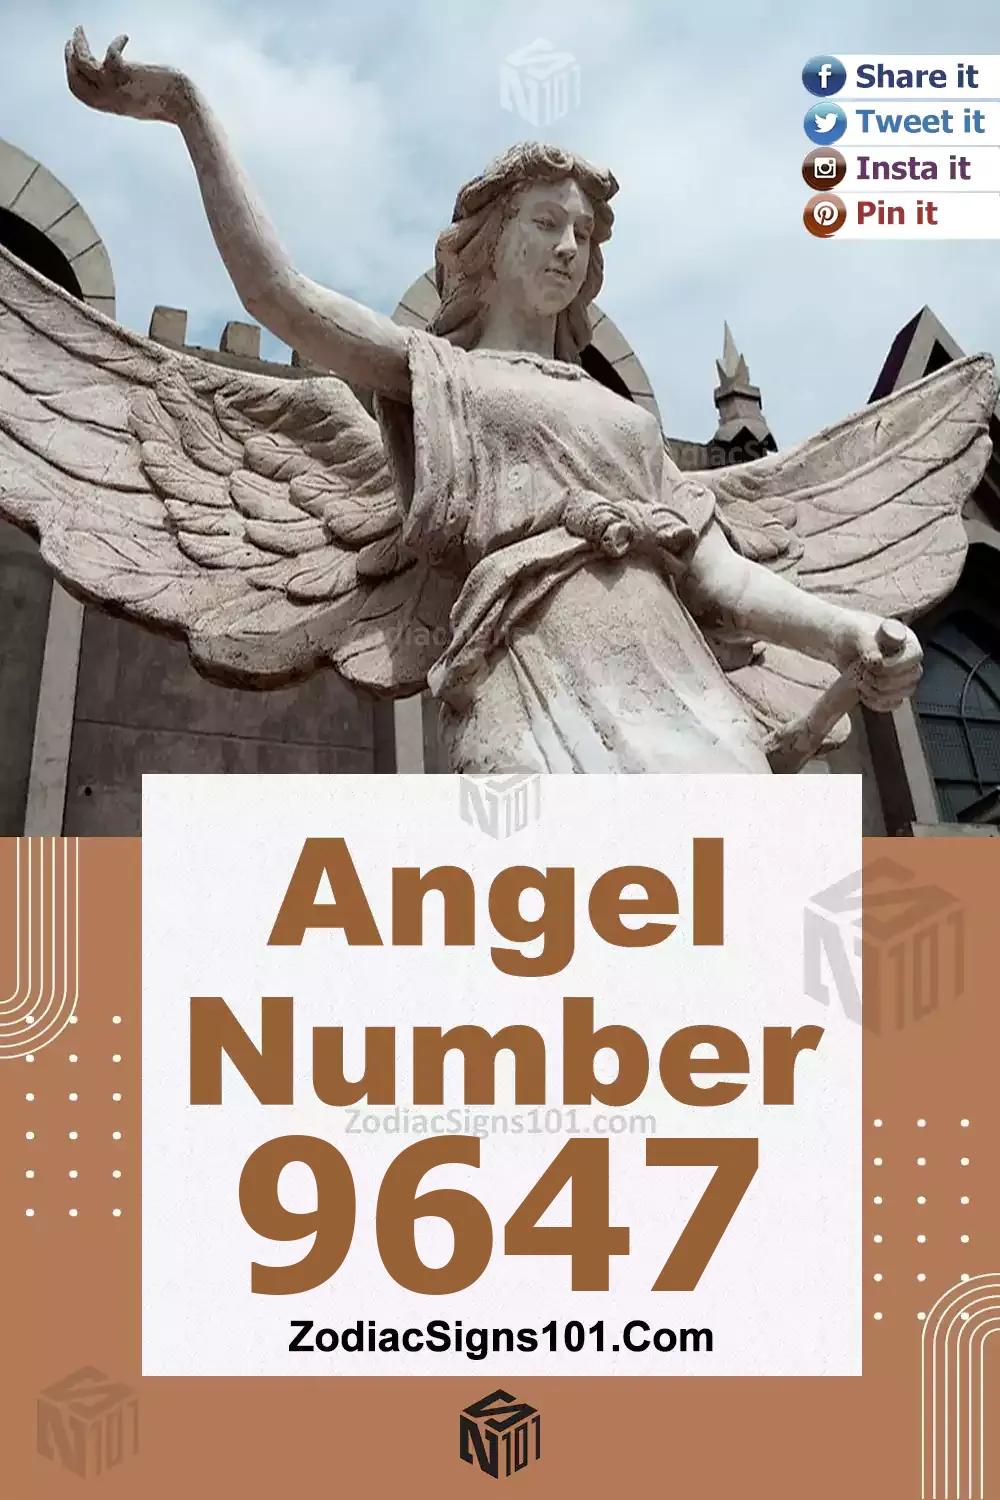 9647 Angel Number Meaning